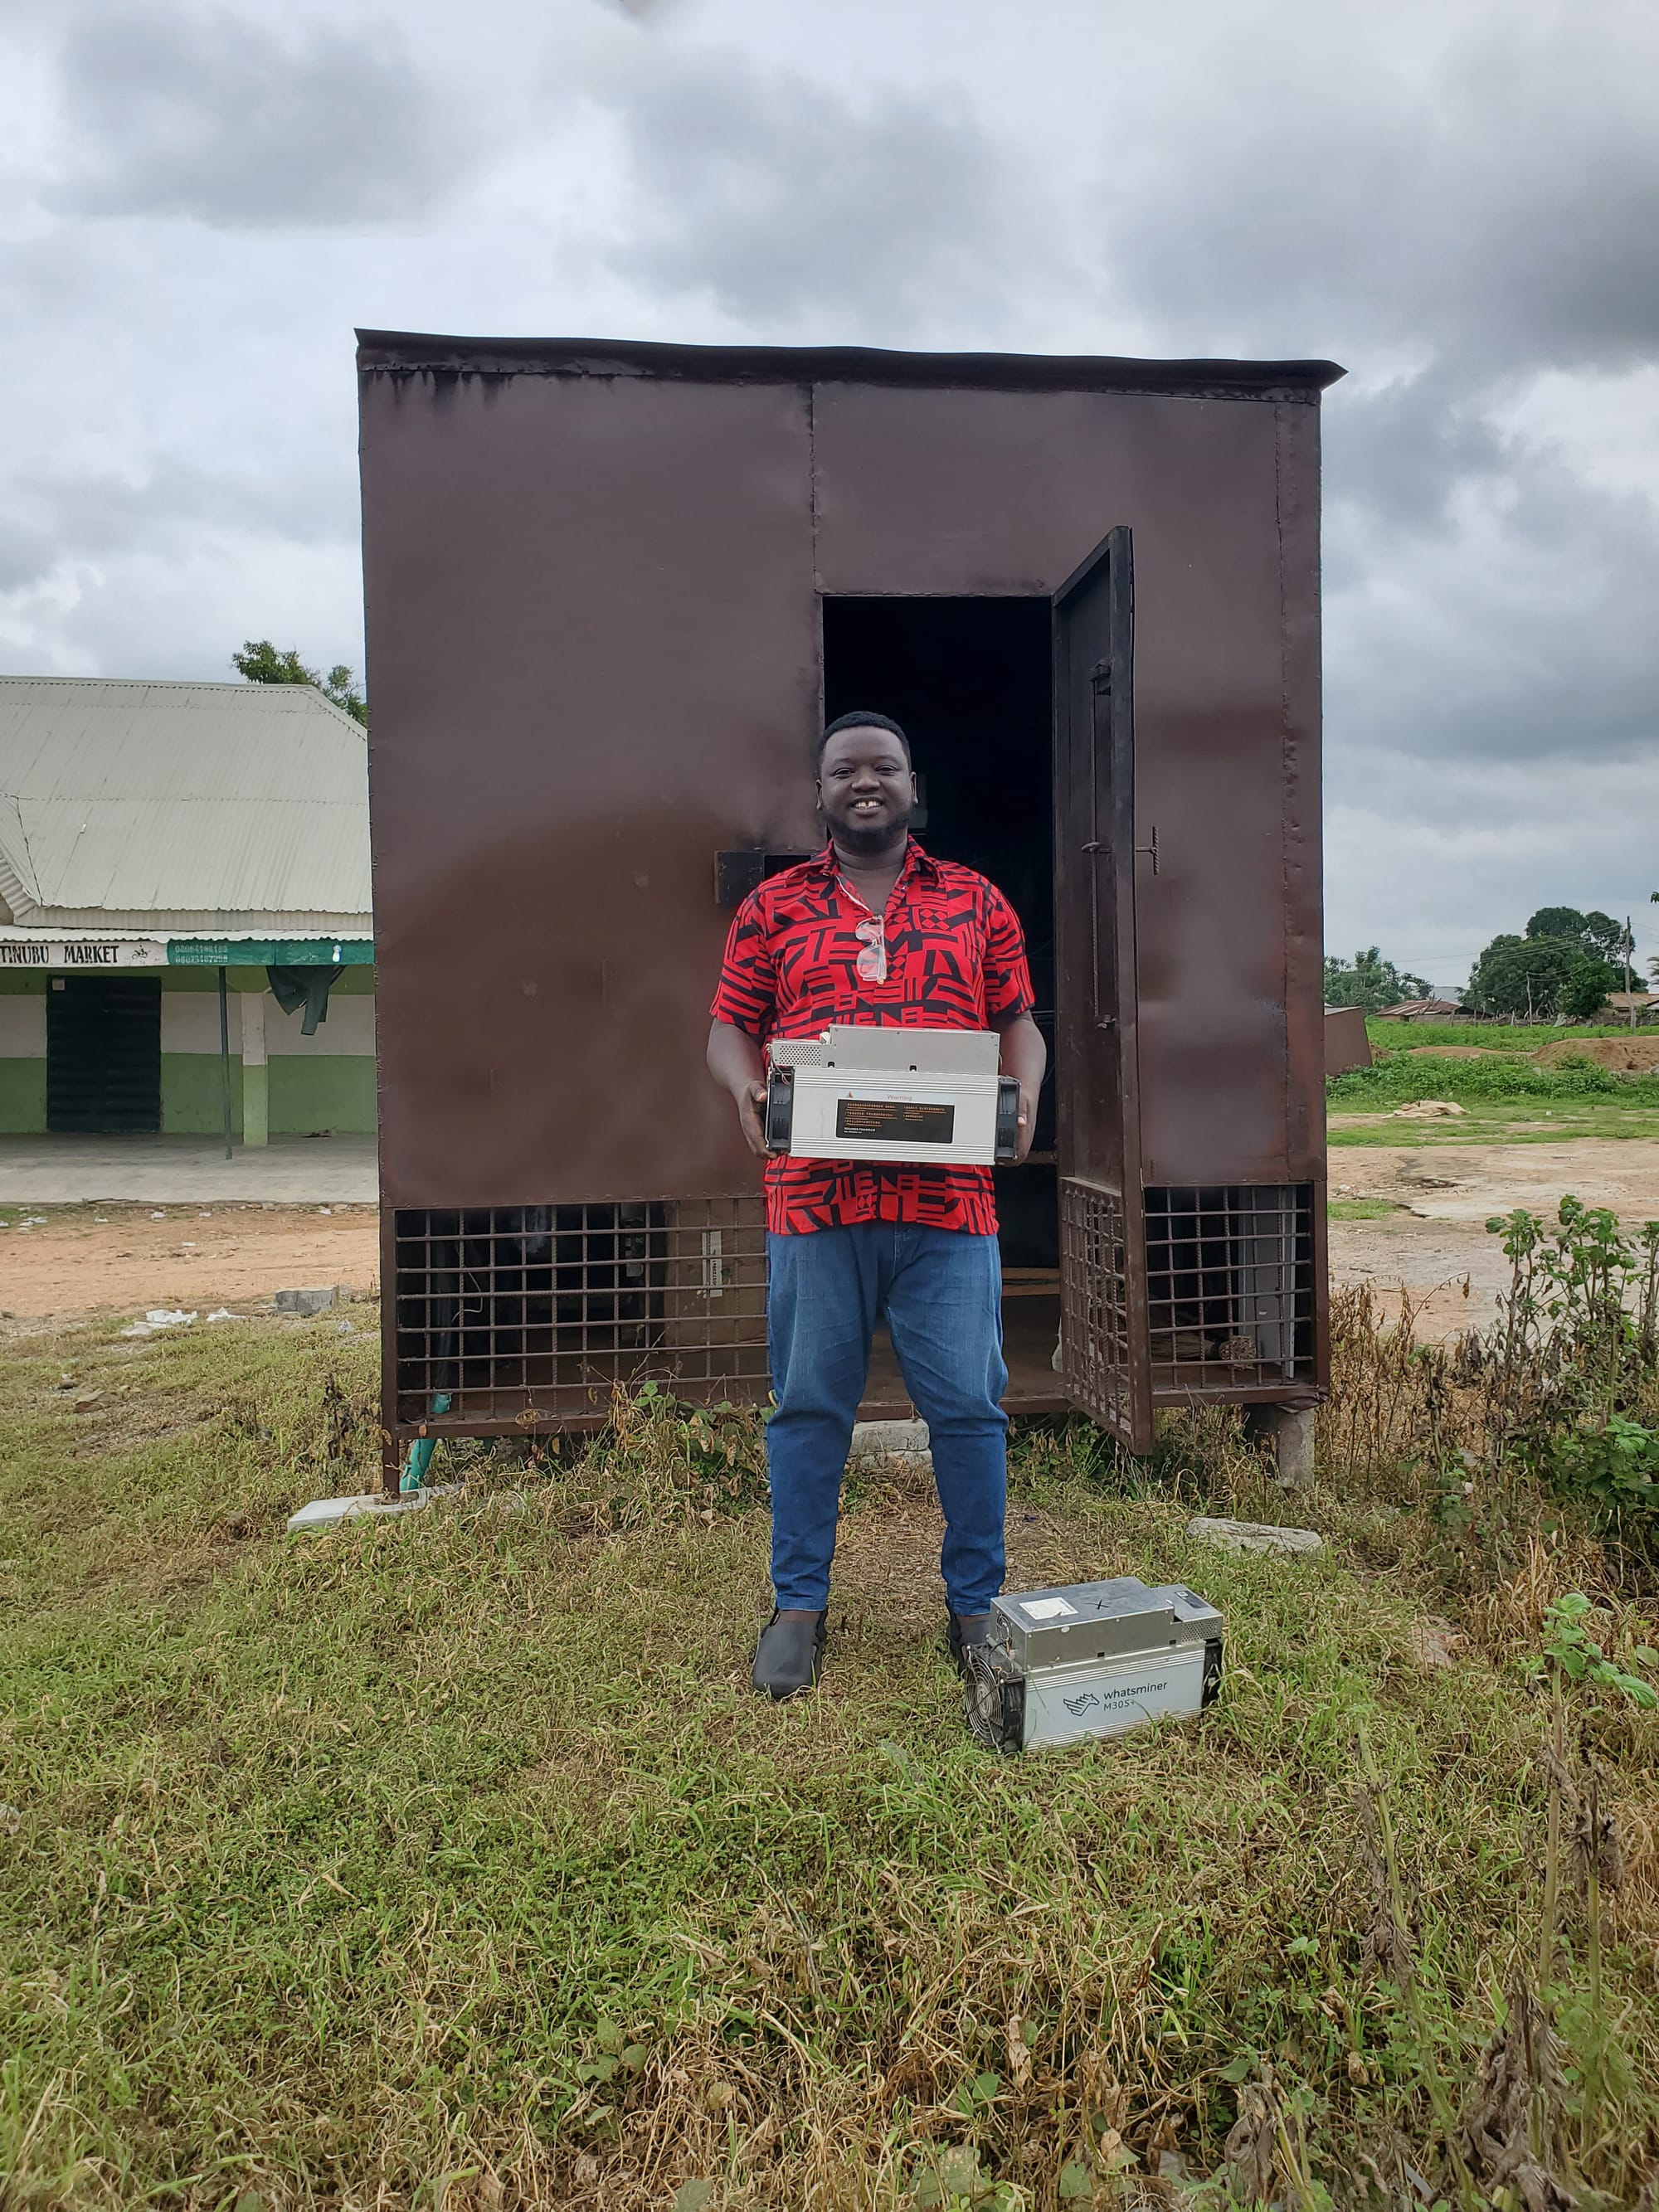 Green Africa Mining Alliance Delivers First ASIC Miners for Seed Program